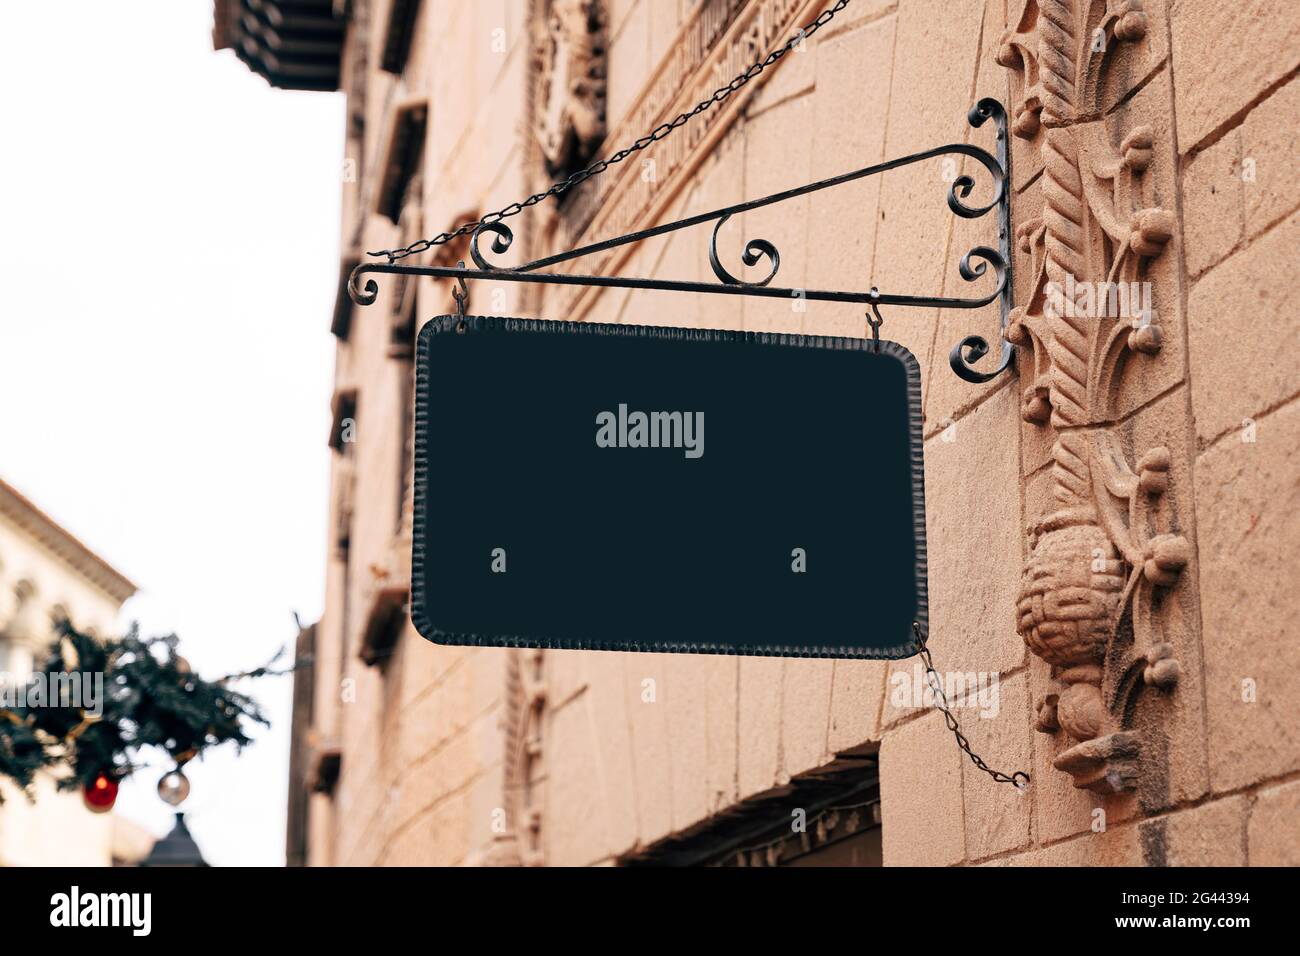 Stylish rectangular blank sign in a wrought-iron frame hangs on the stone wall of an ancient building Stock Photo